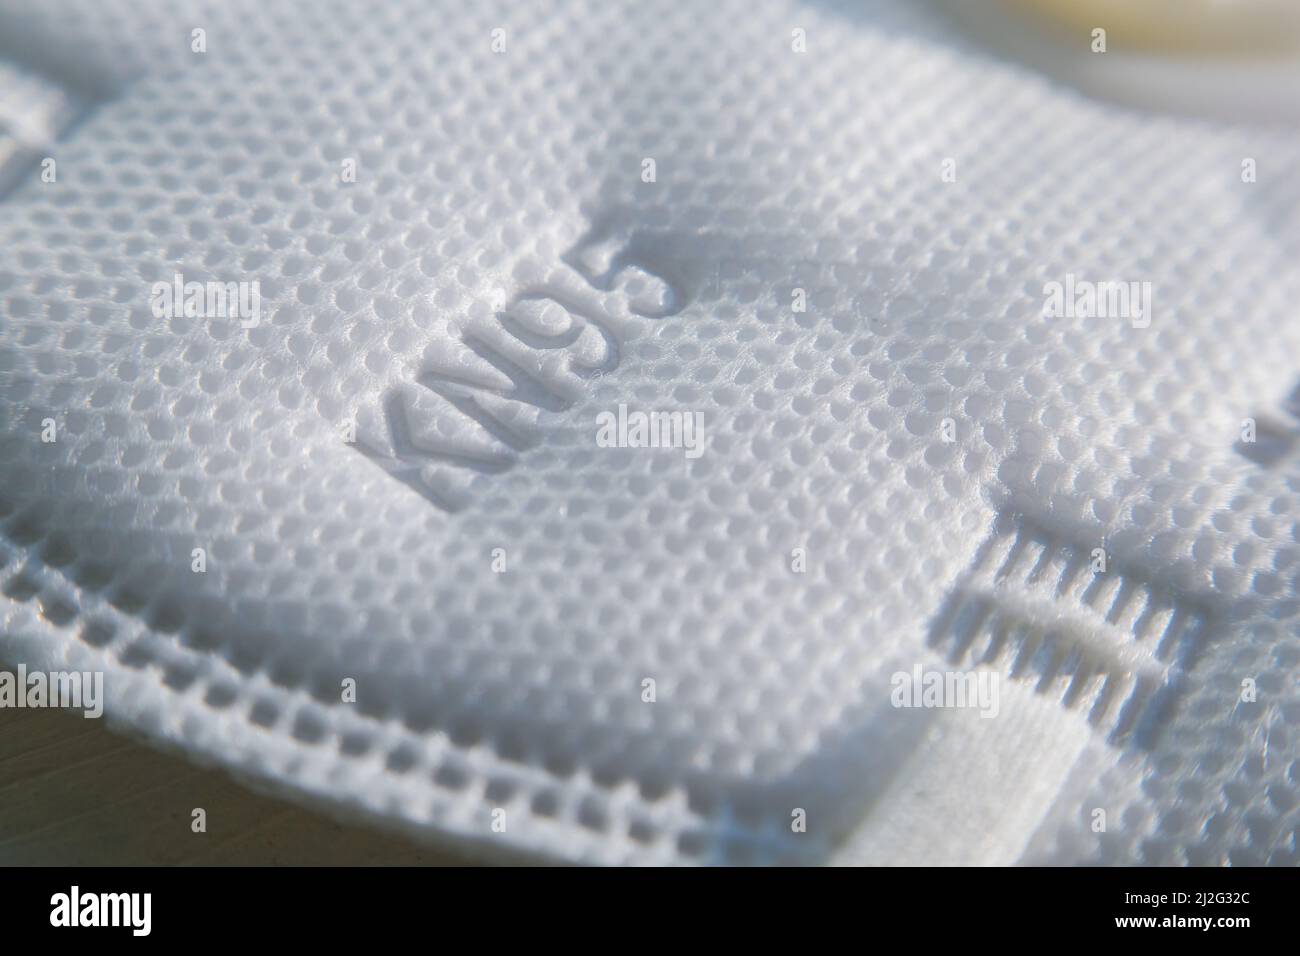 detail of kn95 protective mask Stock Photo